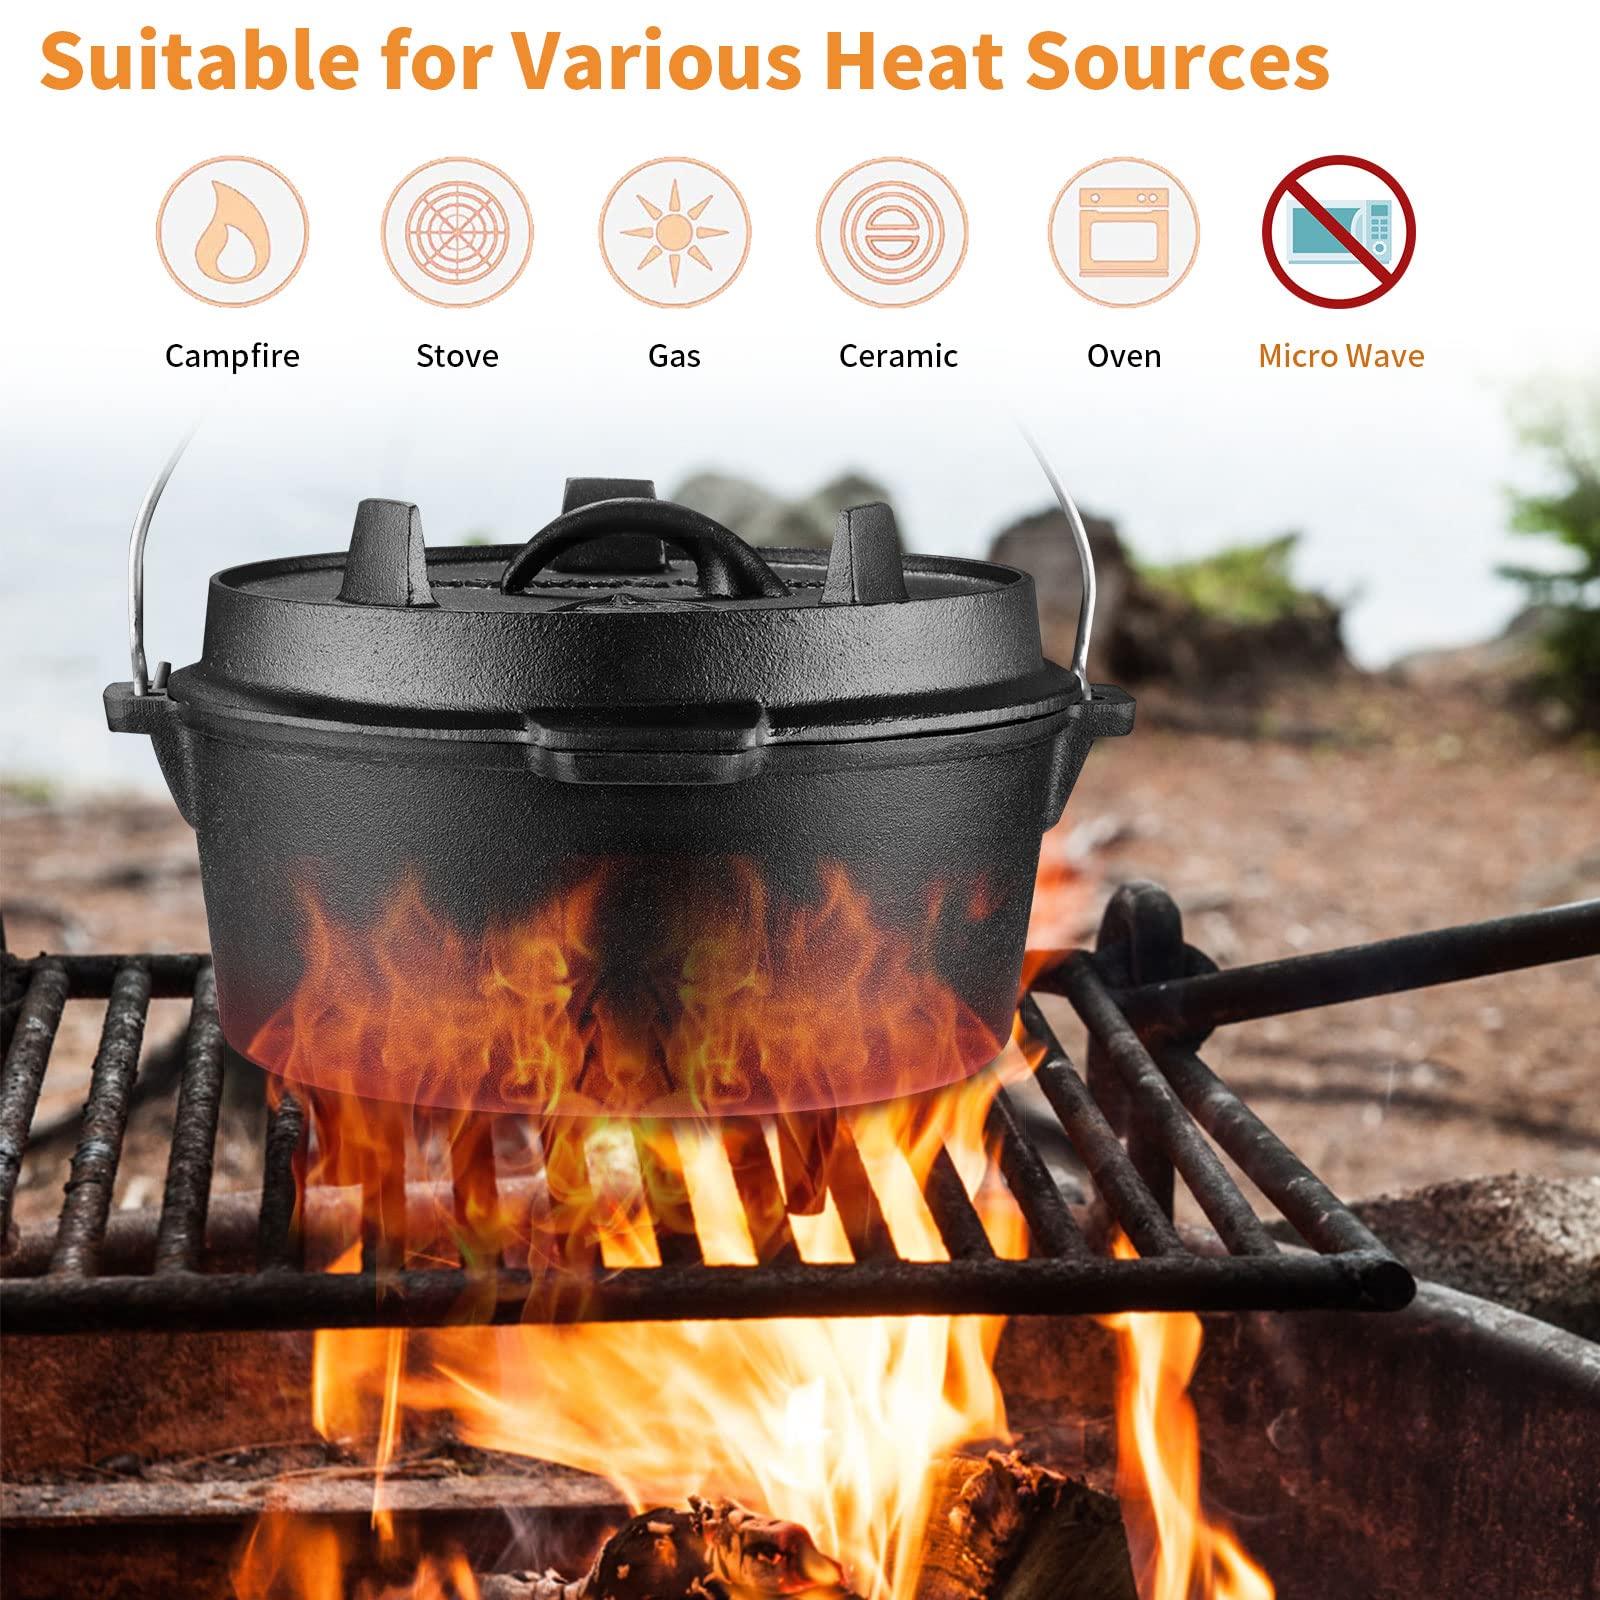 Camping Dutch Oven,9 Qt Pre-Seasoned Camping Cookware Pot With Lid - Lid Lifter,Cast Iron Deep Pot with Metal Handle for Camping Cooking BBQ Baking Campfire Modern Black - CookCave